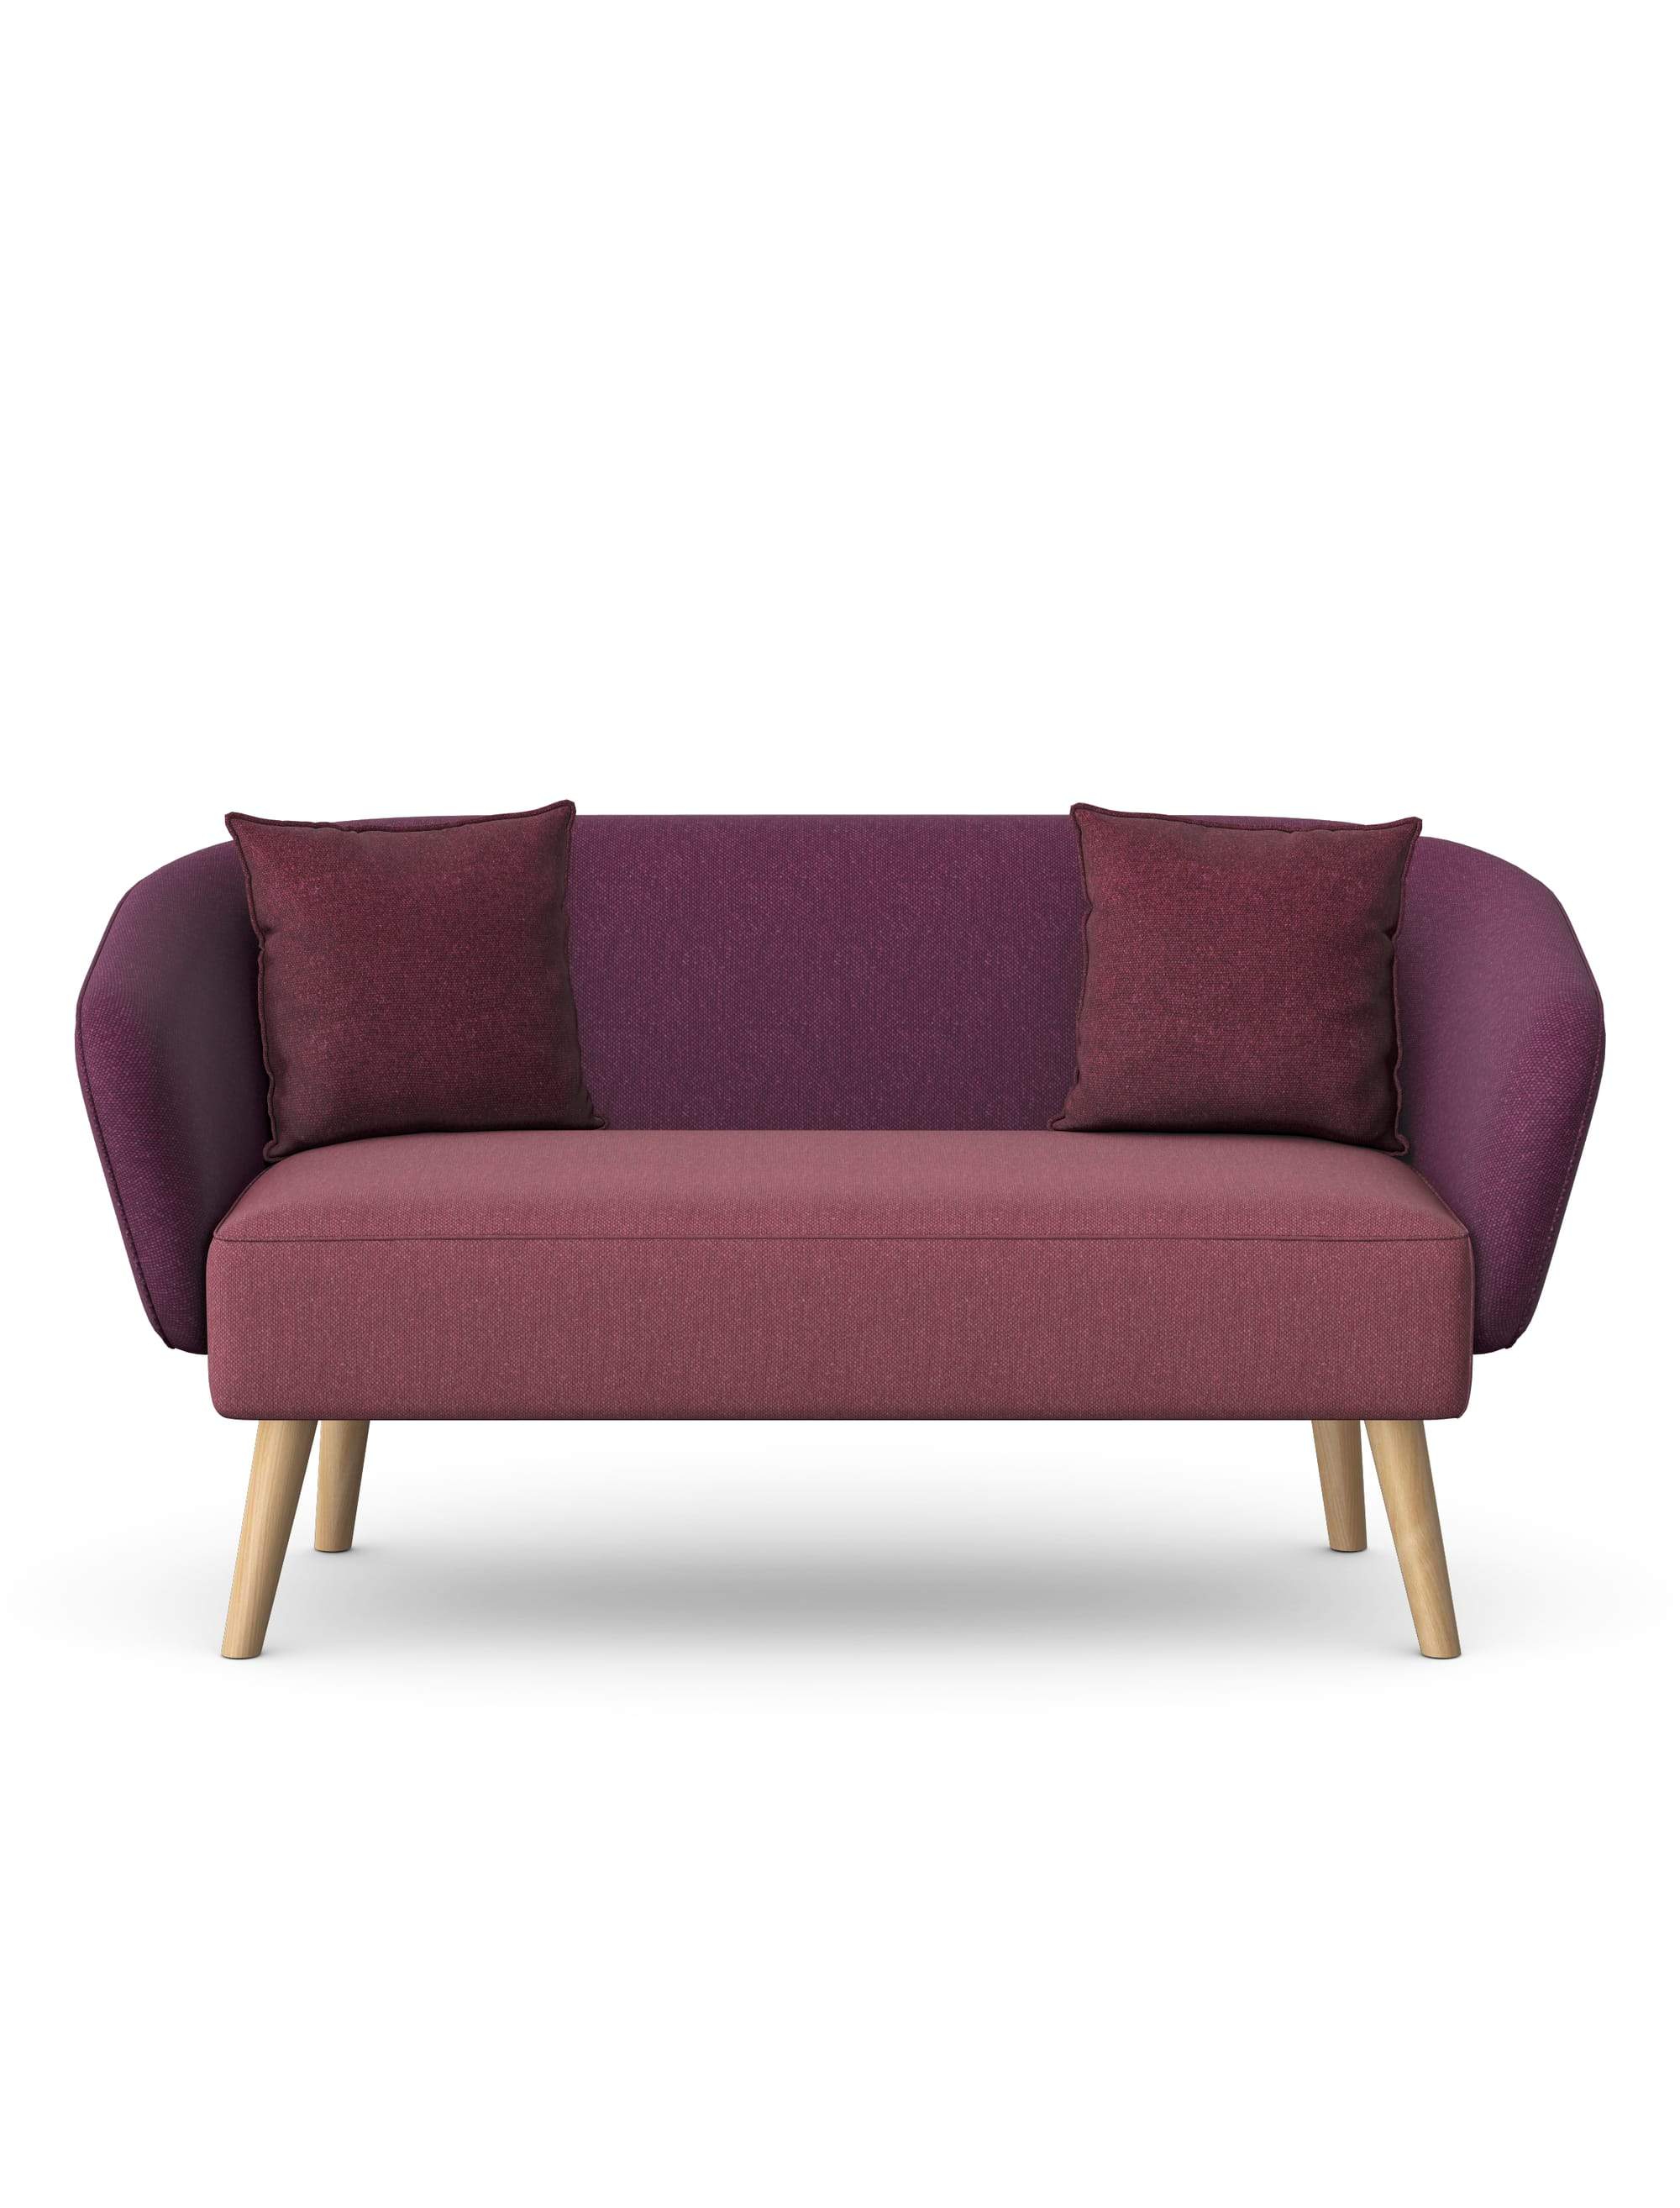 ASPECT - Two Seat Sofa, Wooden Legs